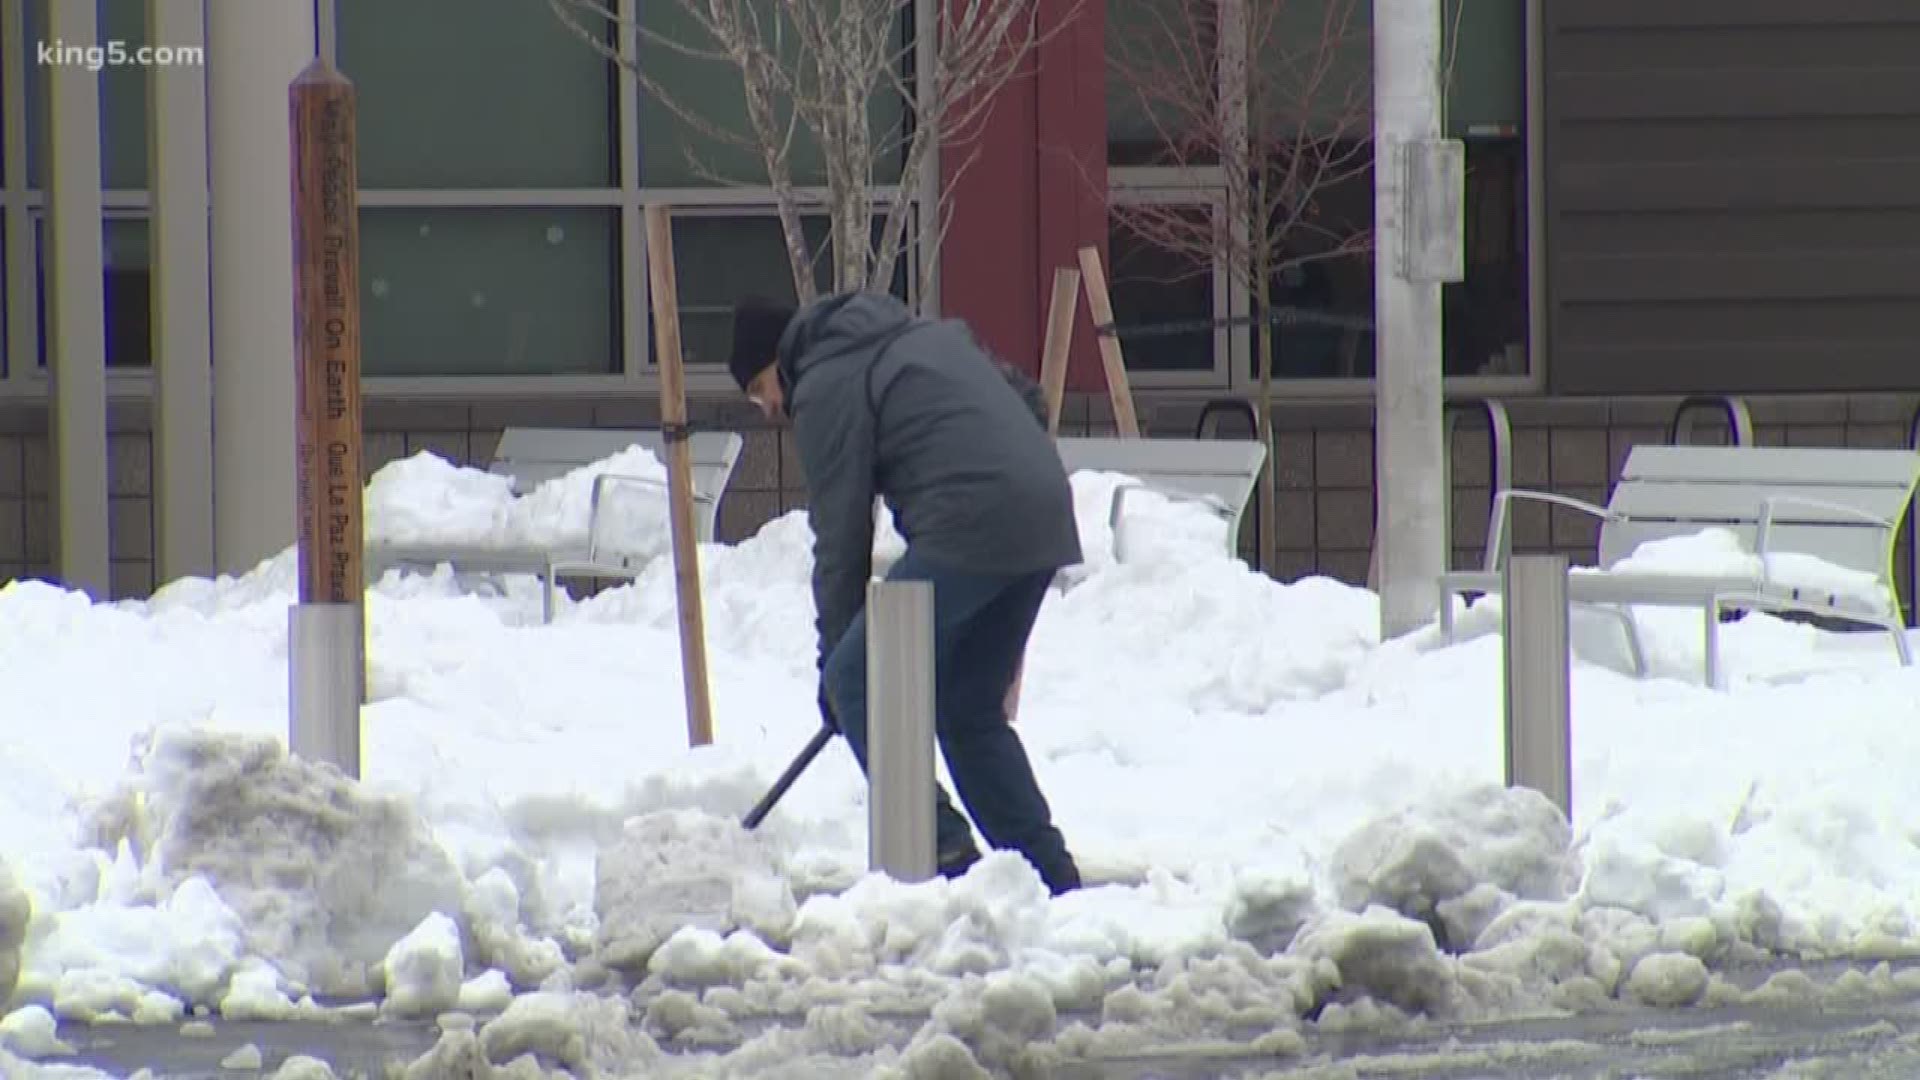 Who is ultimately responsible for clearing streets, and why are some districts making the call even though roads seem clear? KING 5's Chris Daniels joins us with what the situation looks like outside Seattle.